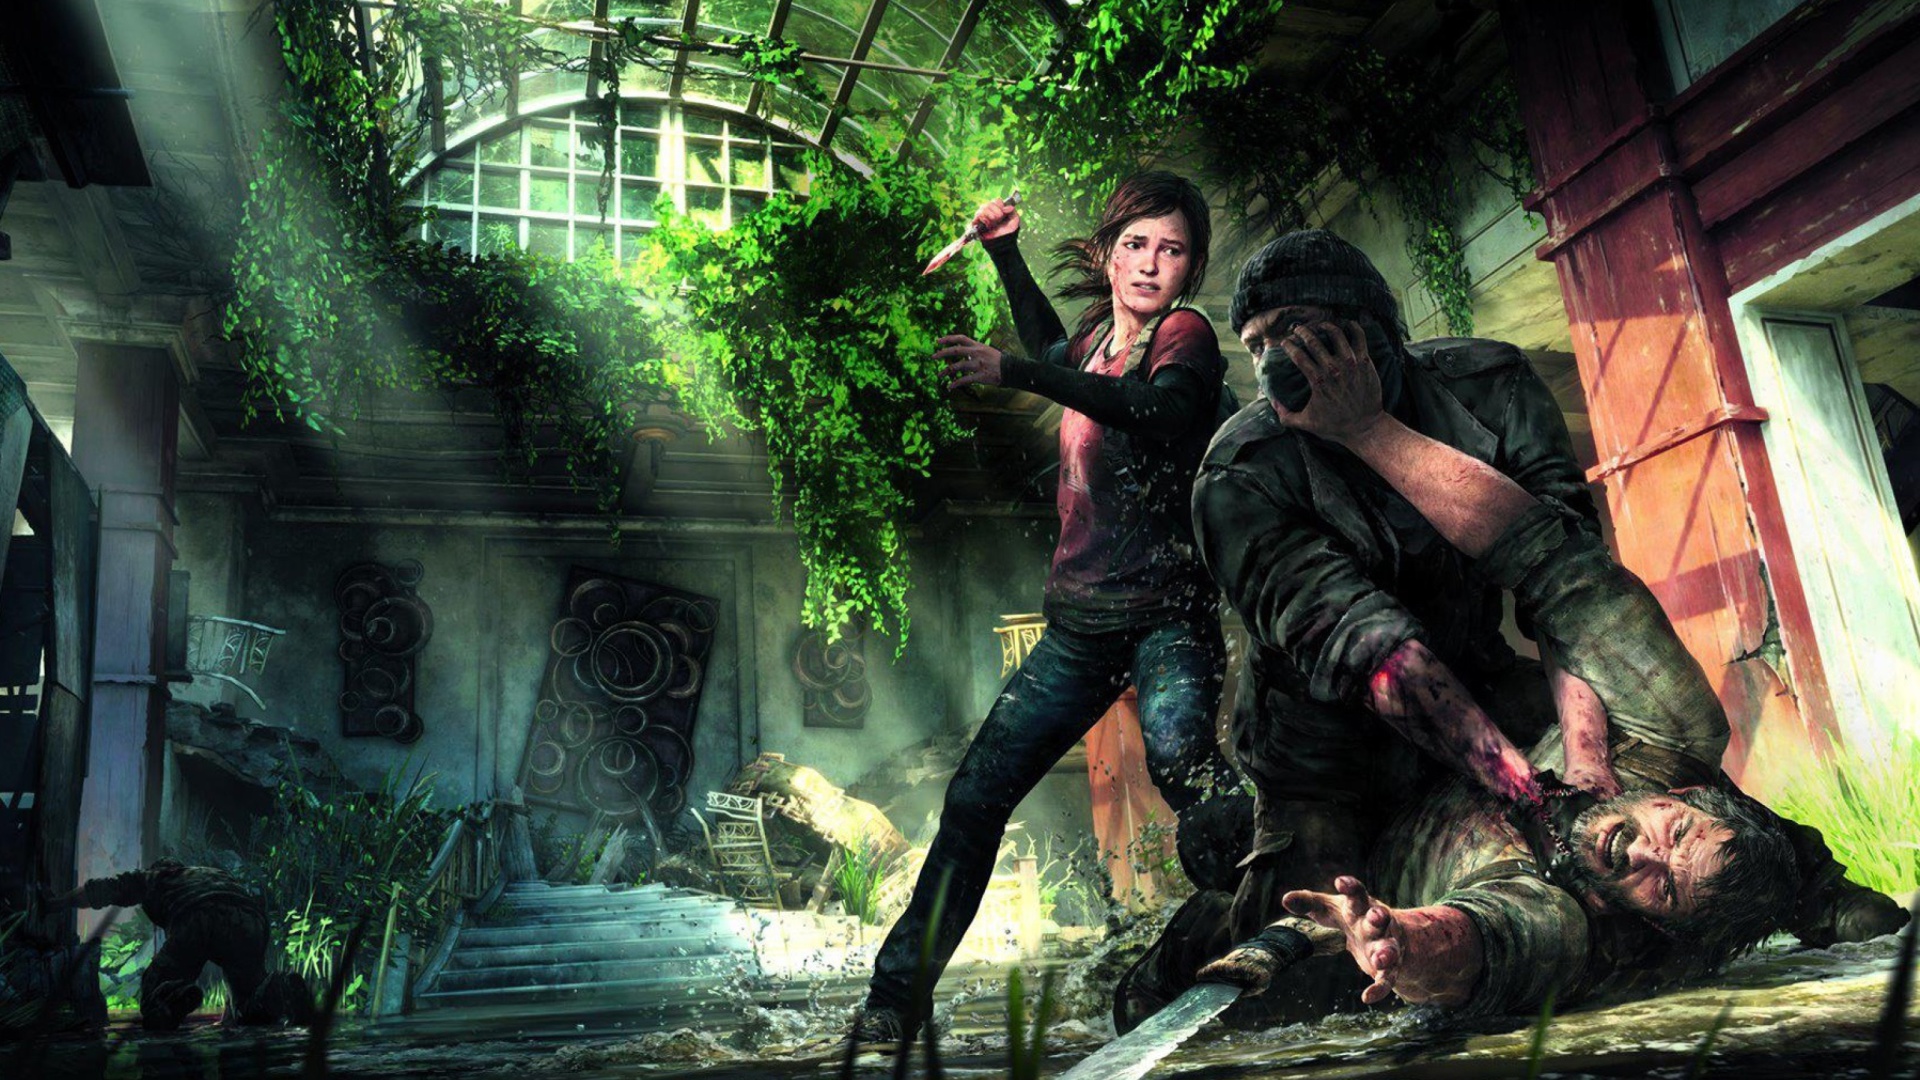 Das The Last Of Us Naughty Dog for Playstation 3 Wallpaper 1920x1080